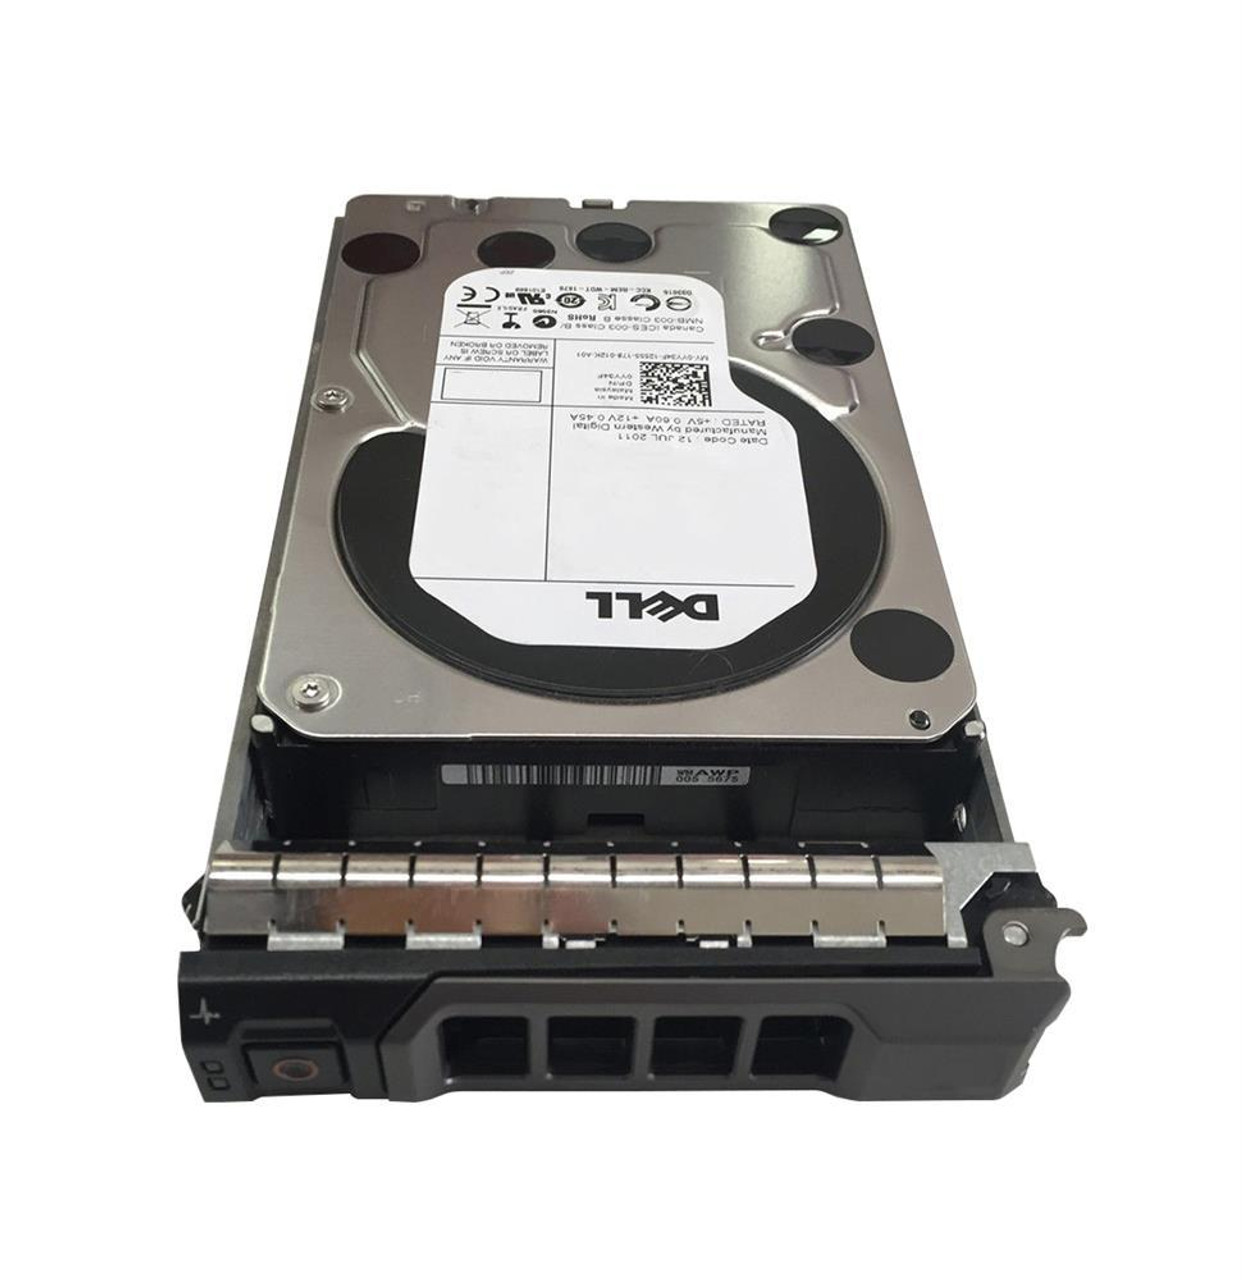 RD2WG Dell 6TB 7200RPM SATA 6Gbps Hot Swap 128MB Cache 3.5-inch Internal Hard Drive with Tray